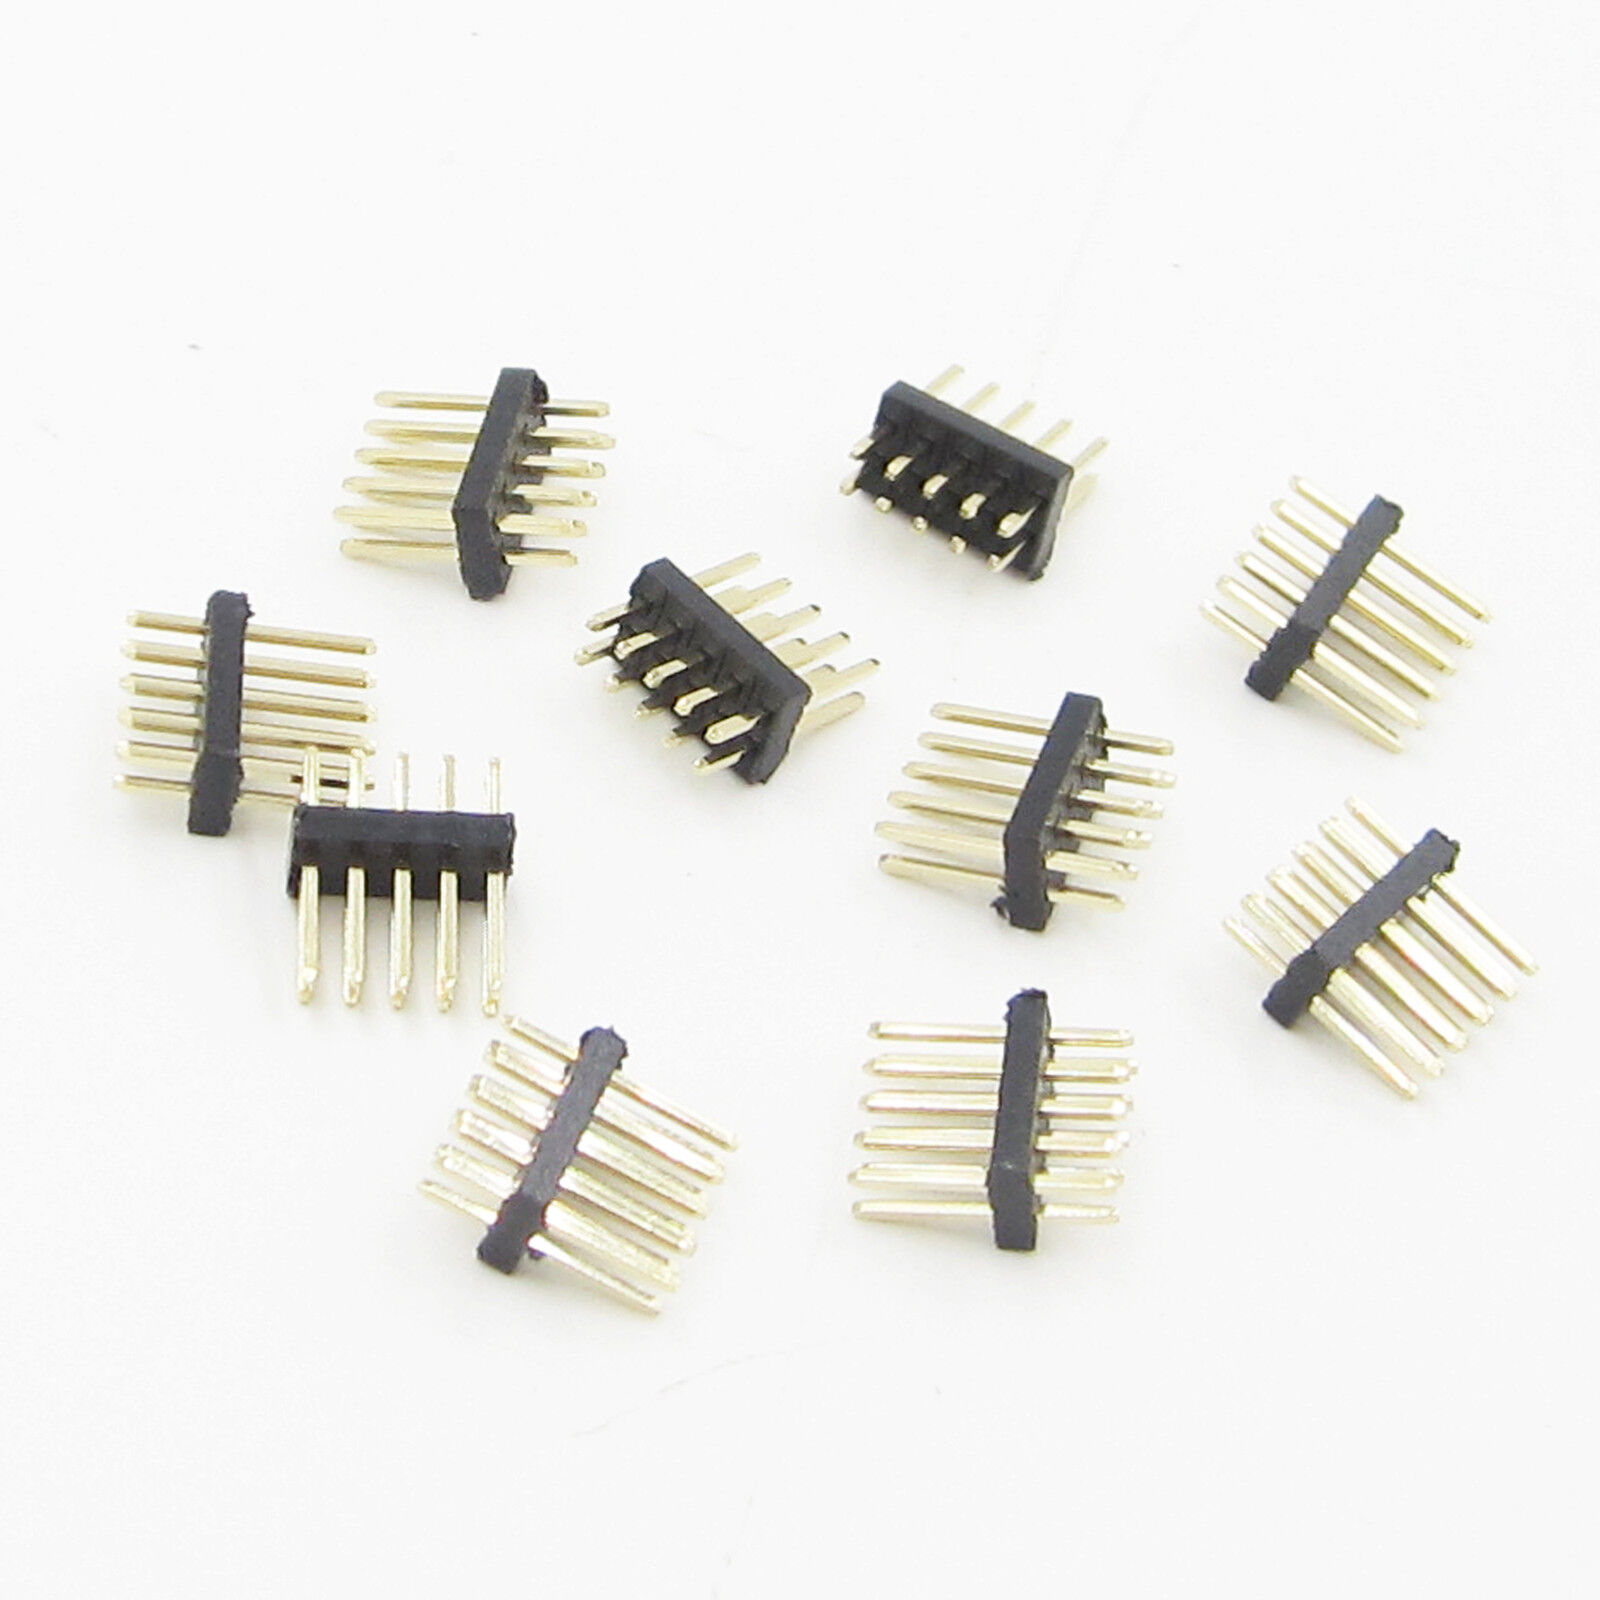 10PCS  Gold Plated 1.27mm Pitch Male 2x5 Pin 10 Pin Straight Pin Header Strip